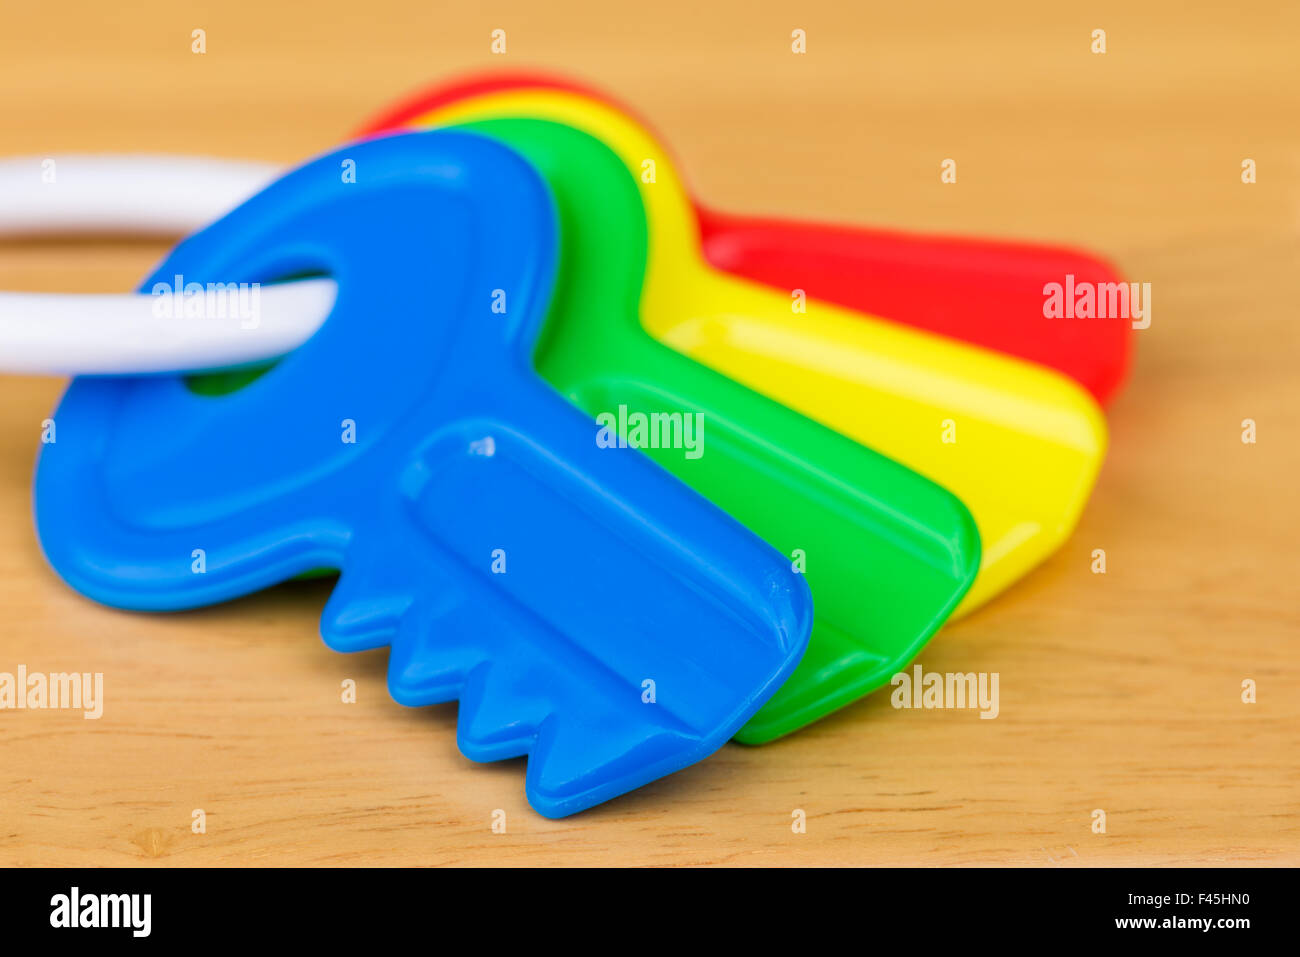 A close up shot of four colorful kid's toy keys. Stock Photo